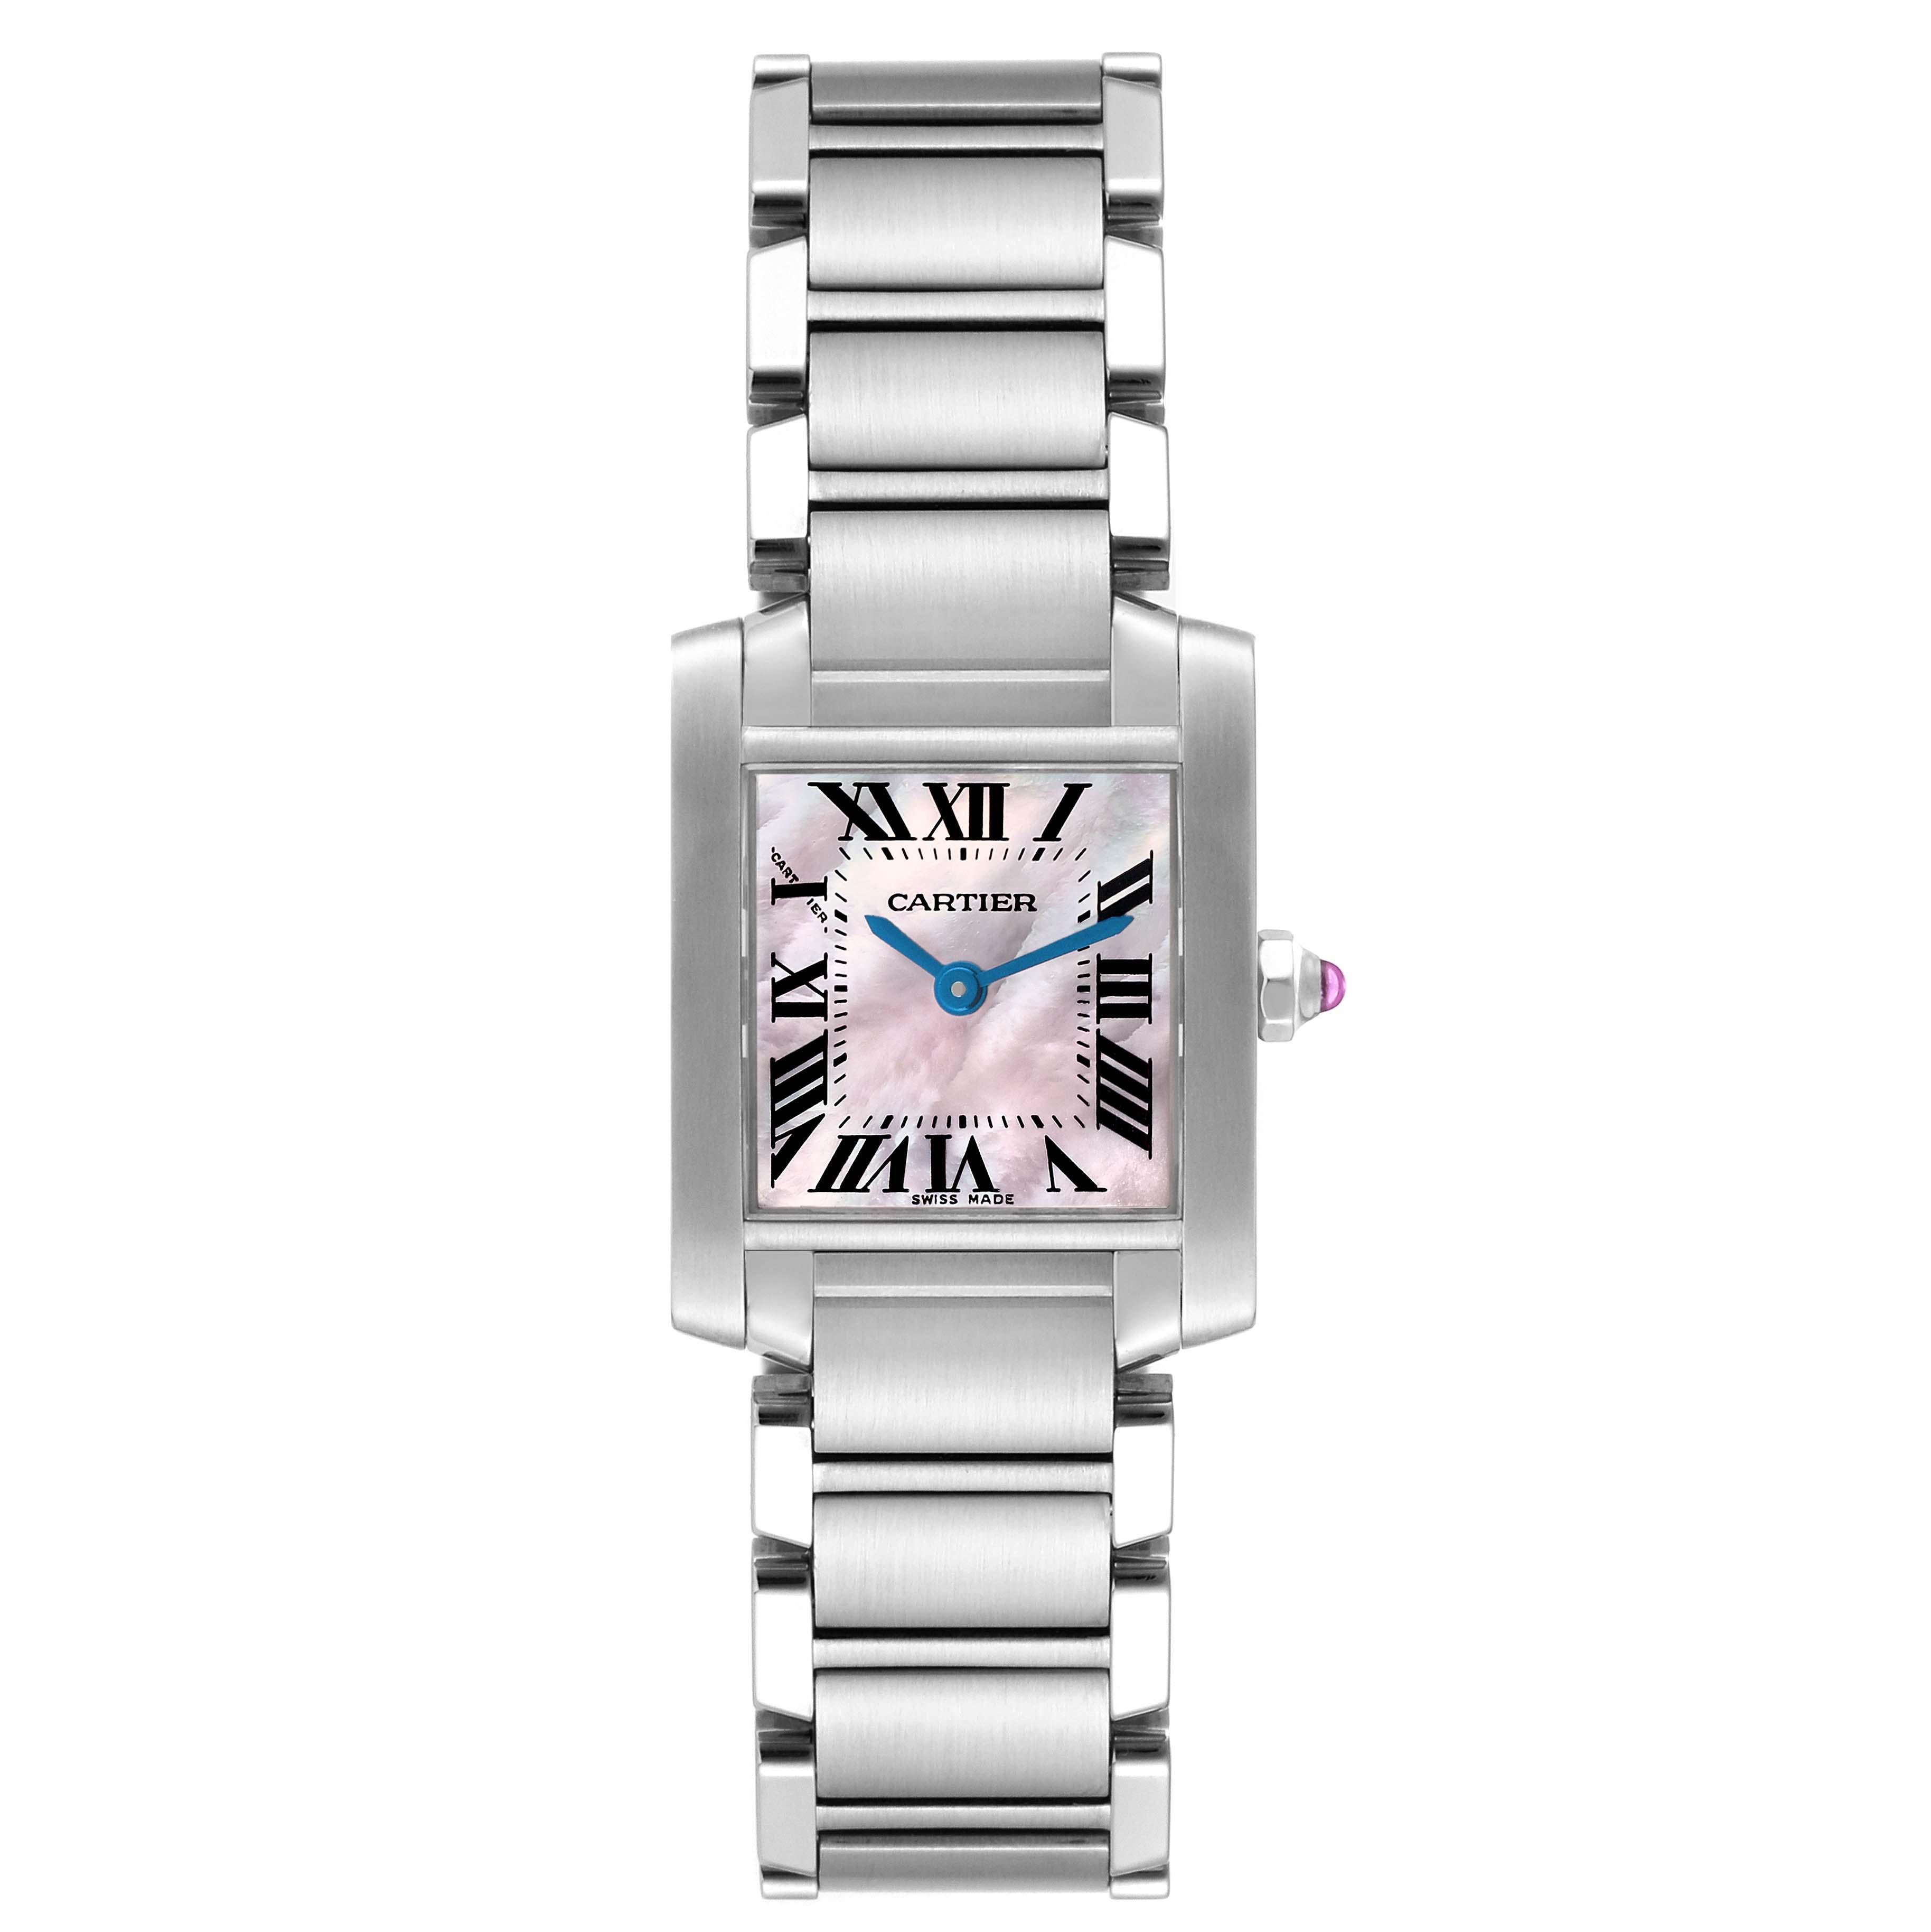 Cartier Tank Francaise Pink Mother Of Pearl Dial Steel Ladies Watch W51028Q3. Quartz movement. Rectangular stainless steel 20.0 x 25.0 mm case. Octagonal crown set with a pink spinel cabochon. . Scratch resistant sapphire crystal. Pink mother of